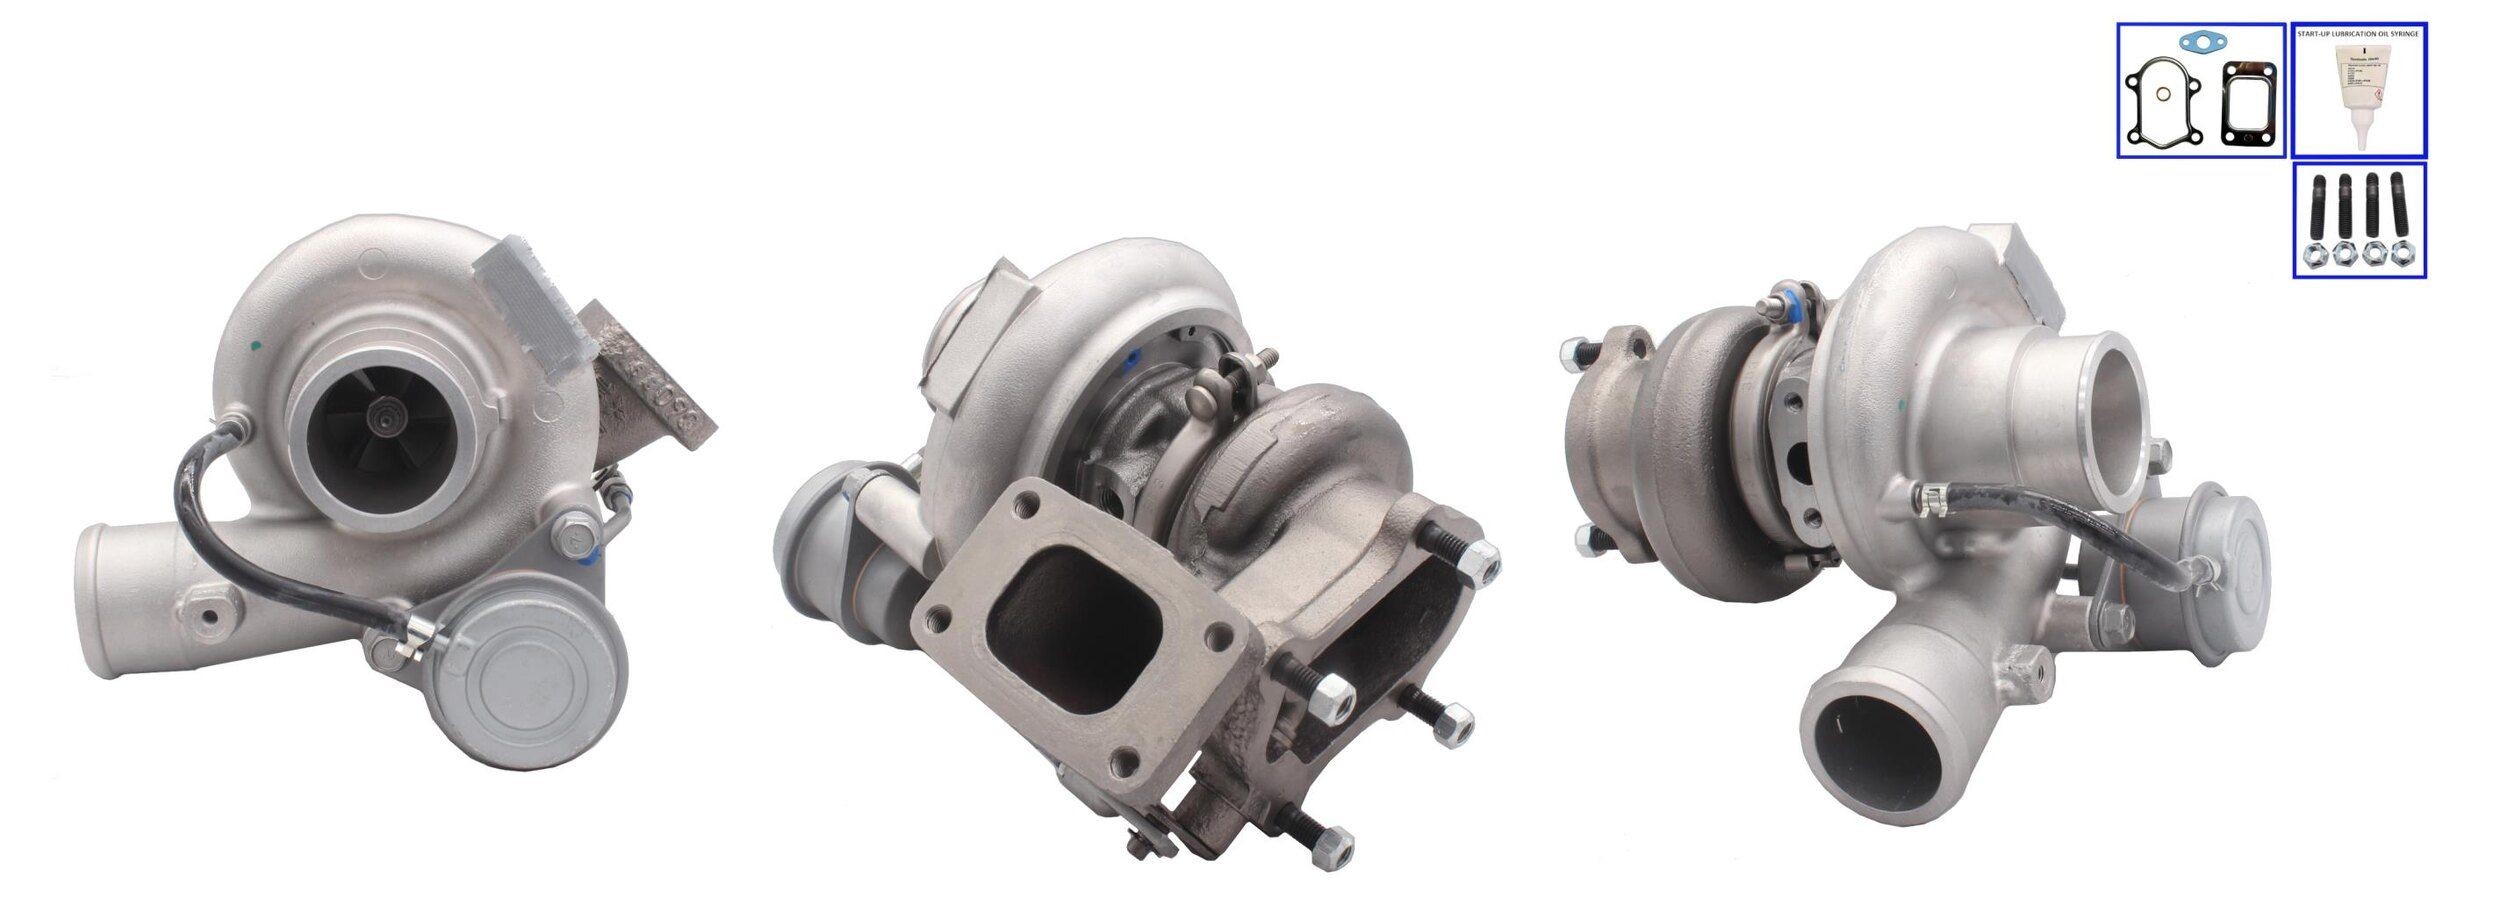 TURBO MOTOR Exhaust Turbocharger, Pneumatically controlled actuator, with gaskets/seals Turbo PA4918902950 buy